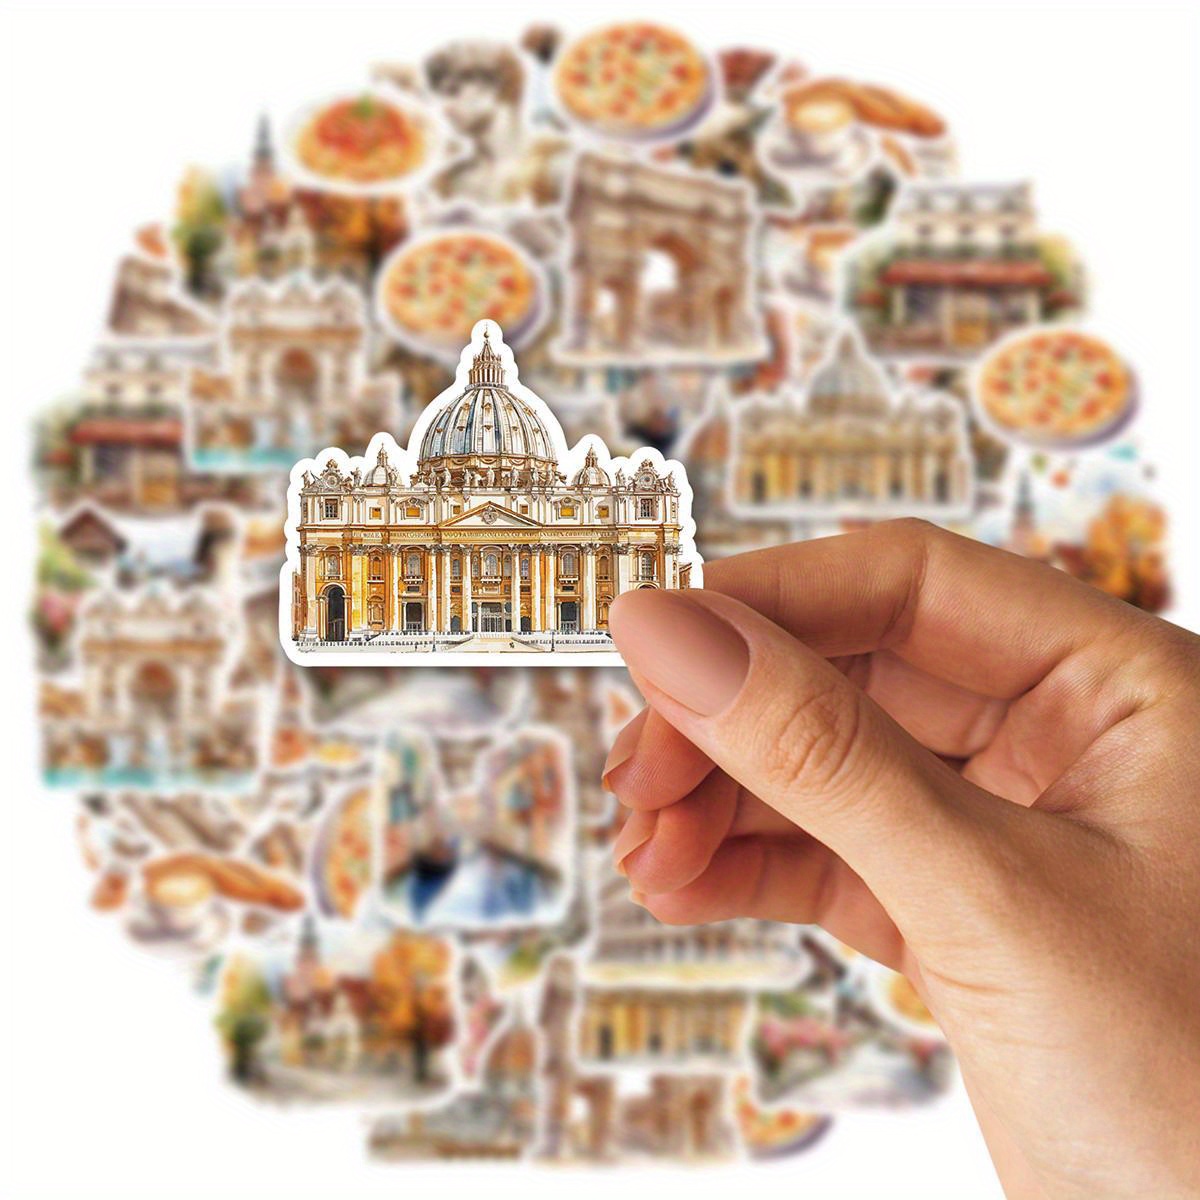 

30pcs European Landmarks And Cuisine Stickers Set - Vintage-inspired Waterproof Pet, Perfect For Scrapbooking, Diaries, And Diy Decor